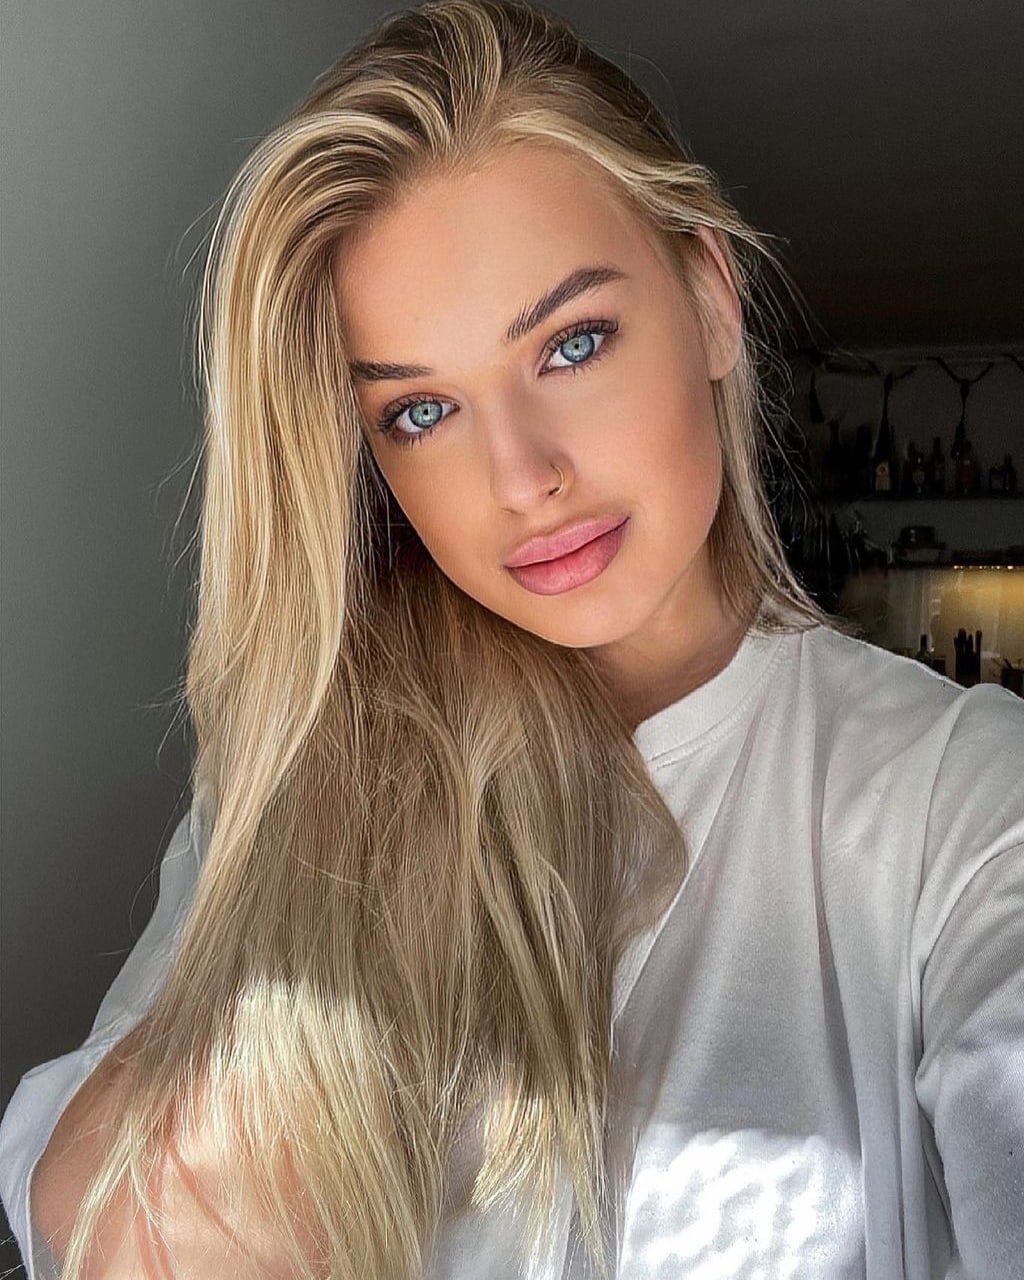 DaisyPRIVATE1 Female,Tall,Blonde,Blue,African